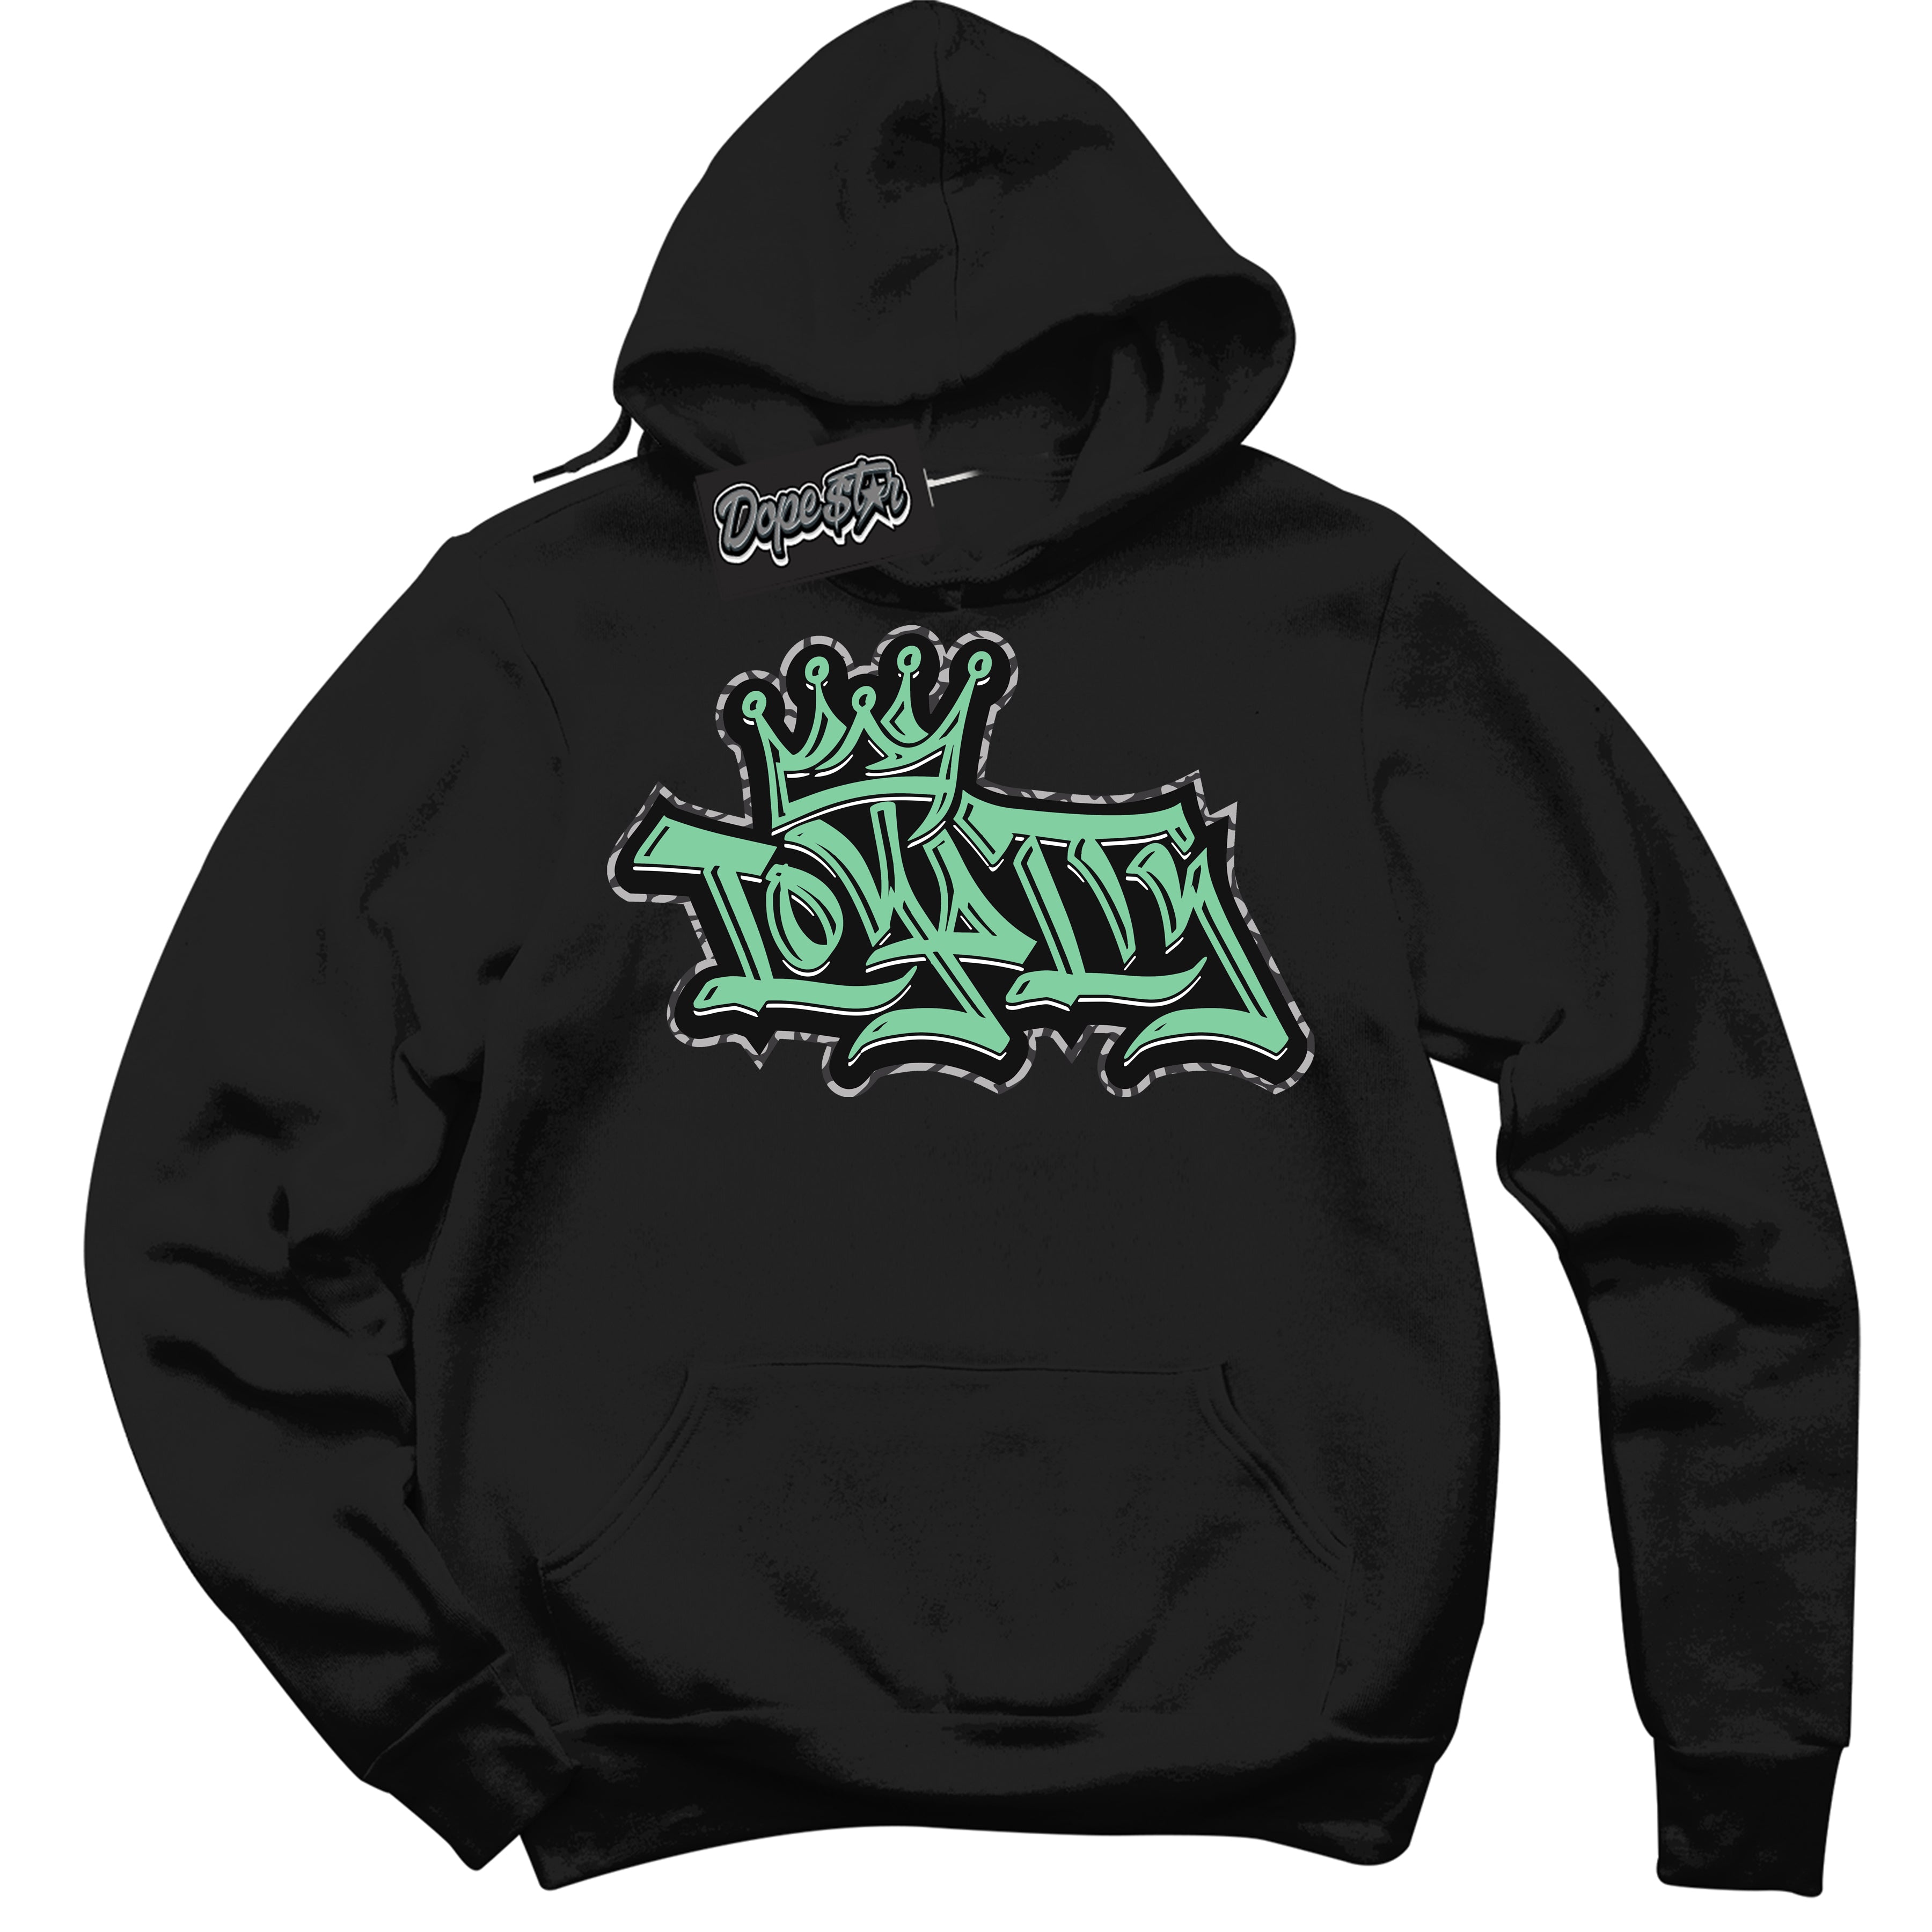 Cool Black Graphic DopeStar Hoodie with “ Loyalty Crown “ print, that perfectly matches Green Glow 3S sneakers